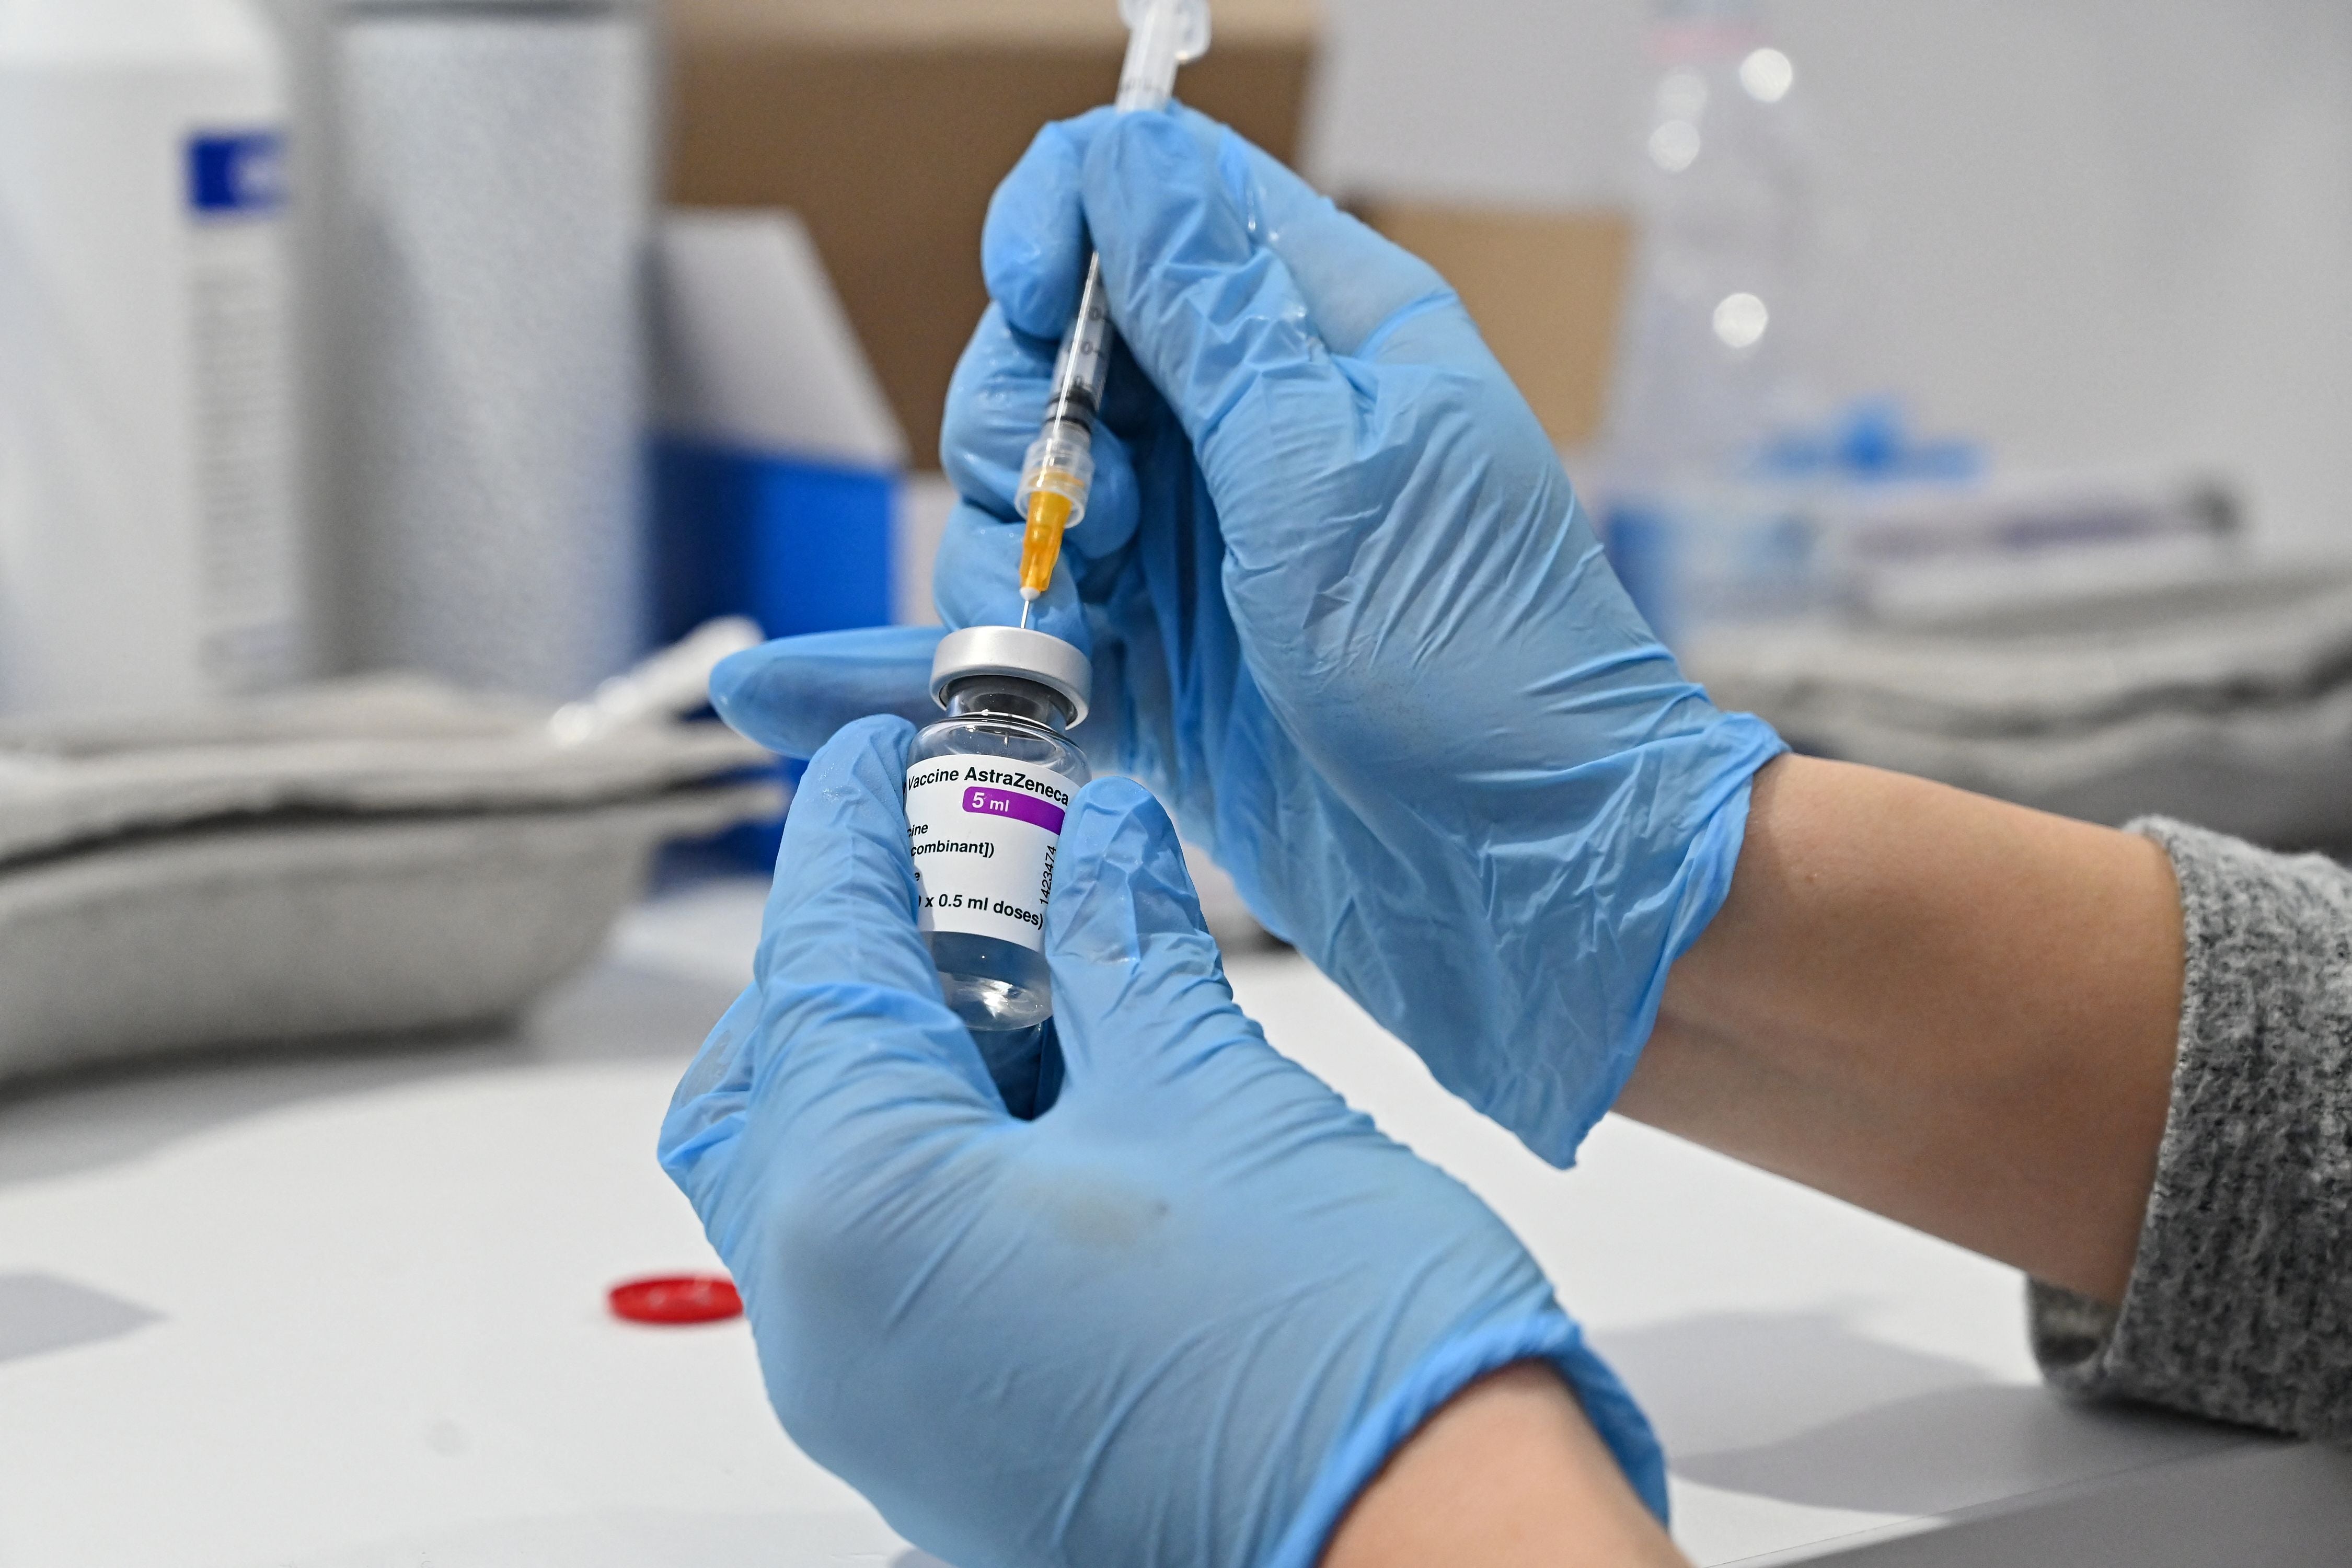 A medical worker fills a syringe from a vial of the AstraZeneca vaccine against Covid-19 on March 24, 2021 at a vaccination hub outside Rome's Termini railway station